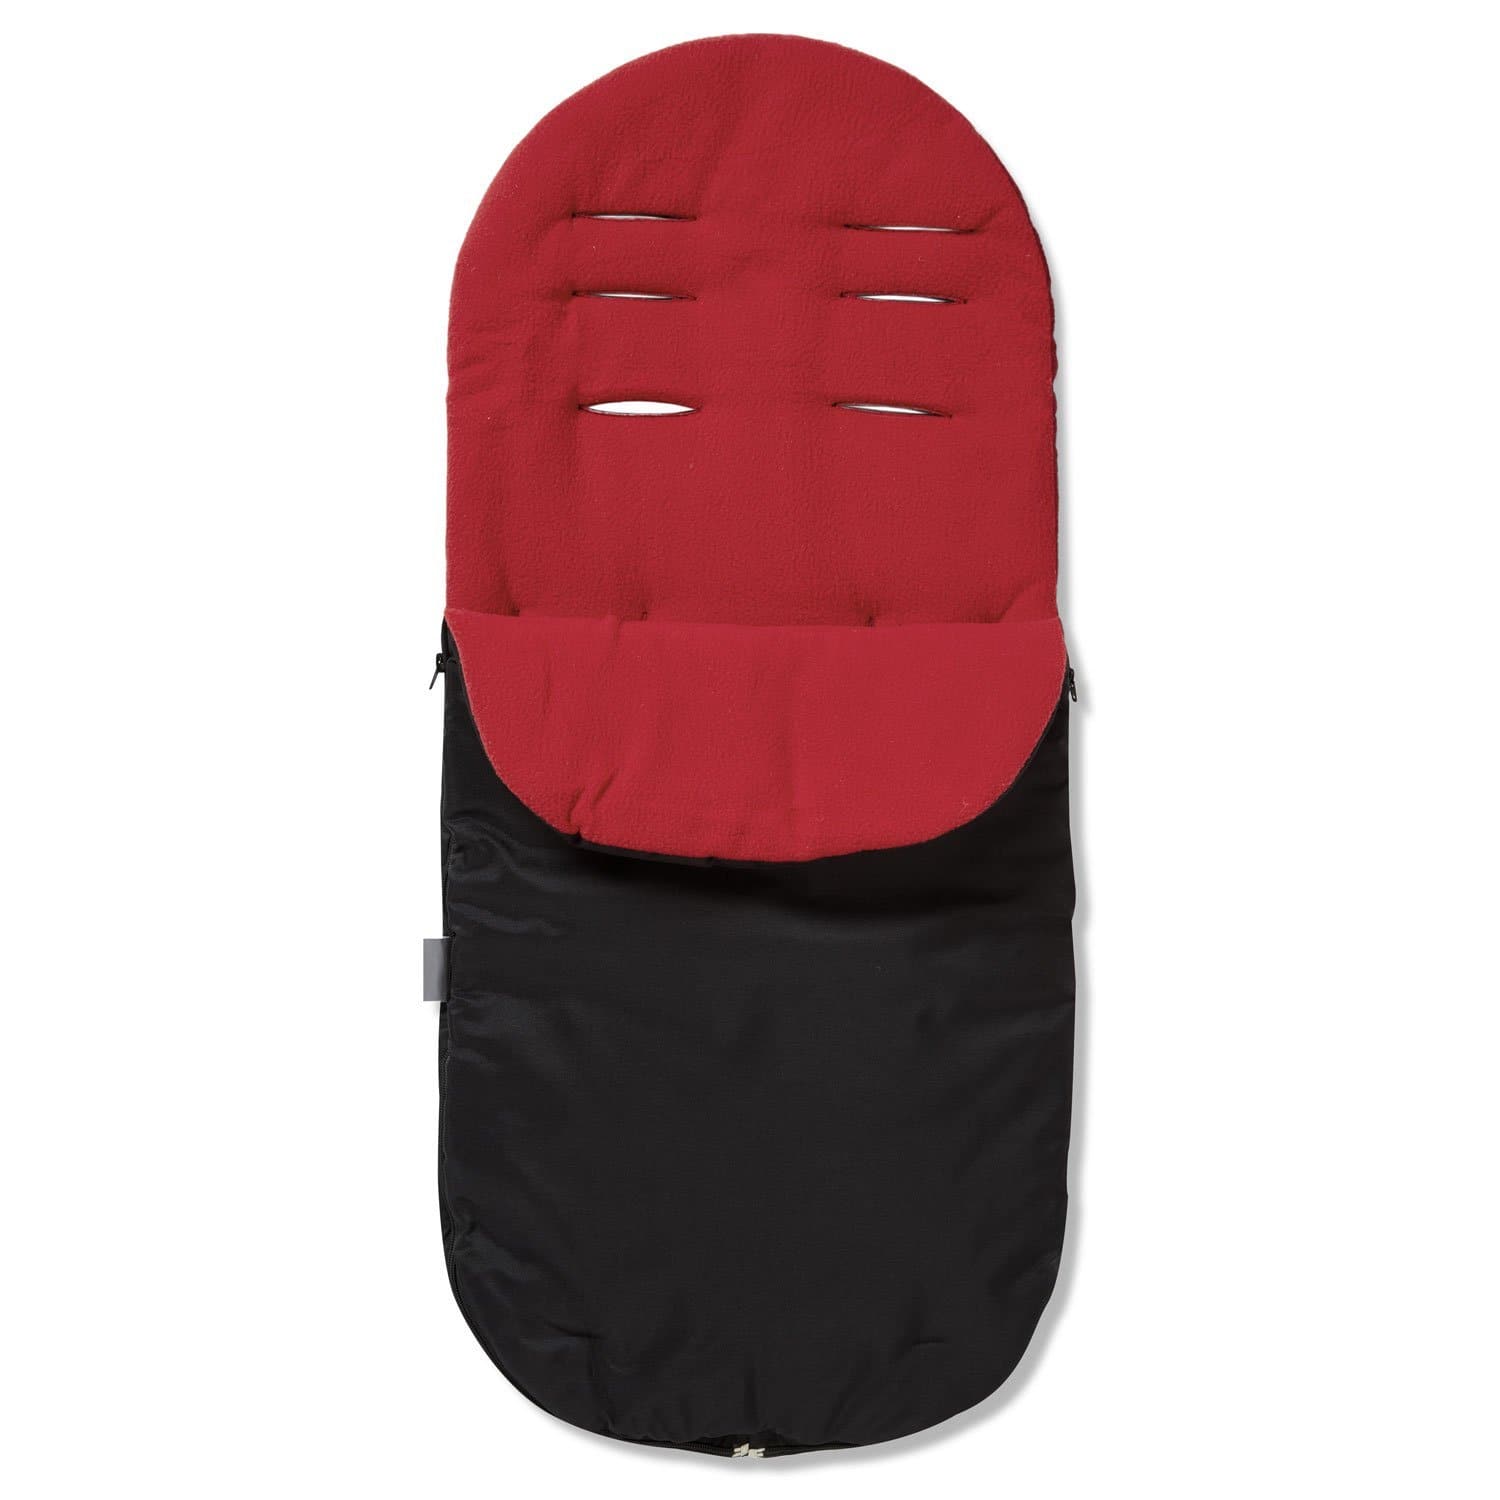 Footmuff / Cosy Toes Compatible with Joolz - Red / Fits All Models | For Your Little One